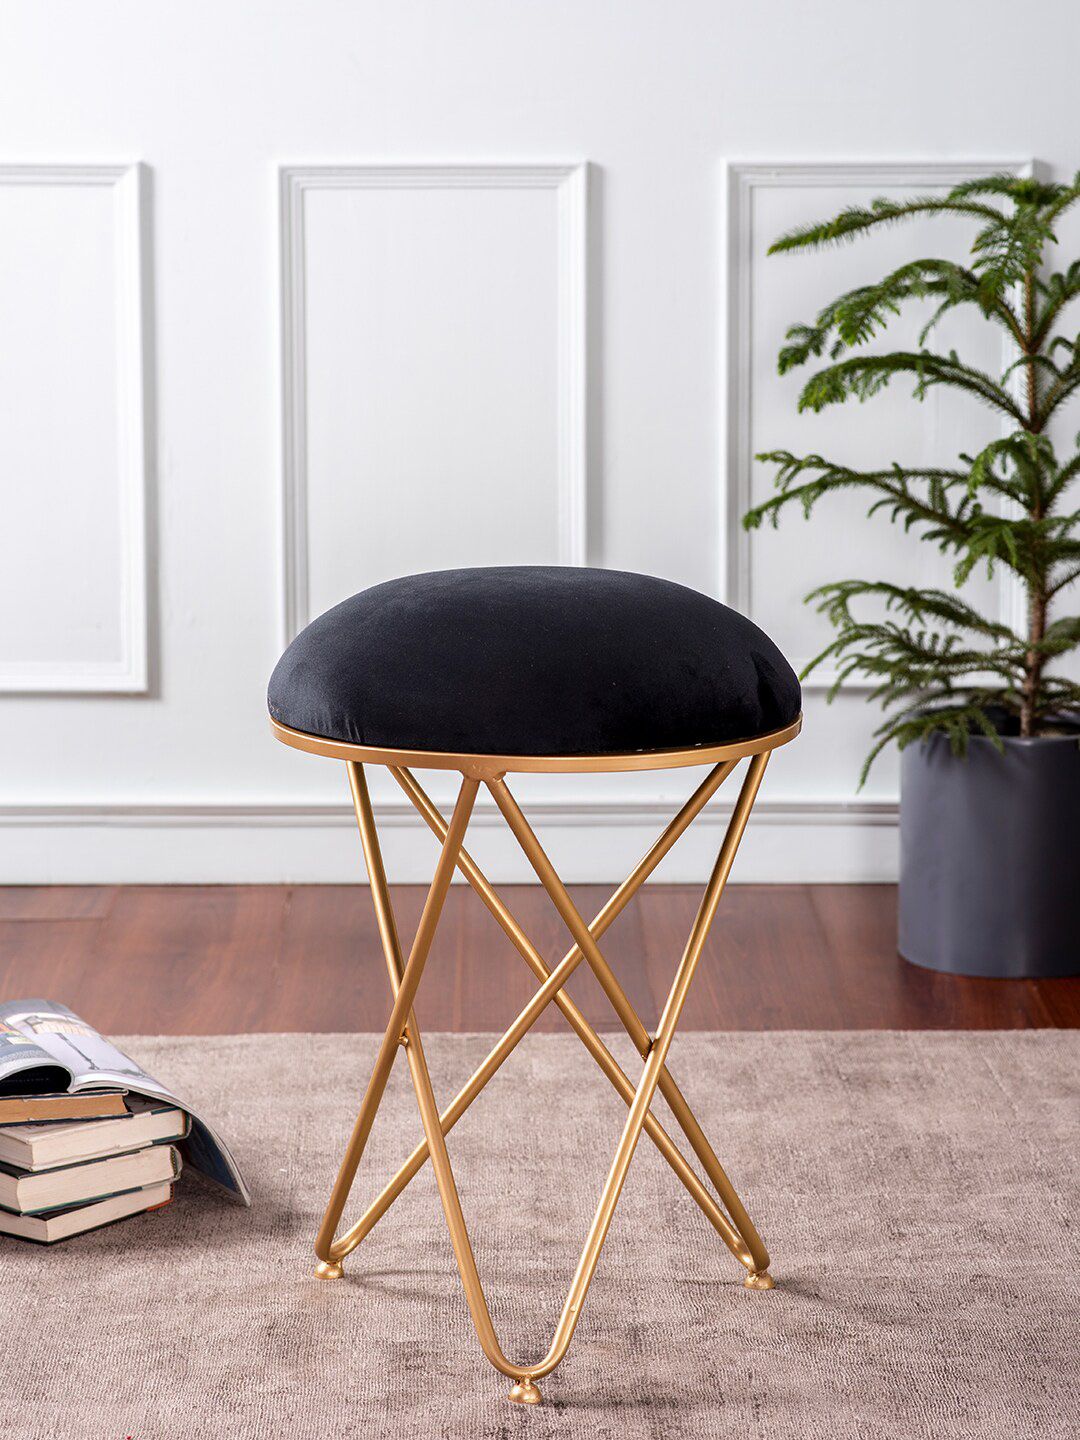 Nestroots Black & Gold-Toned Metal Ottoman Price in India